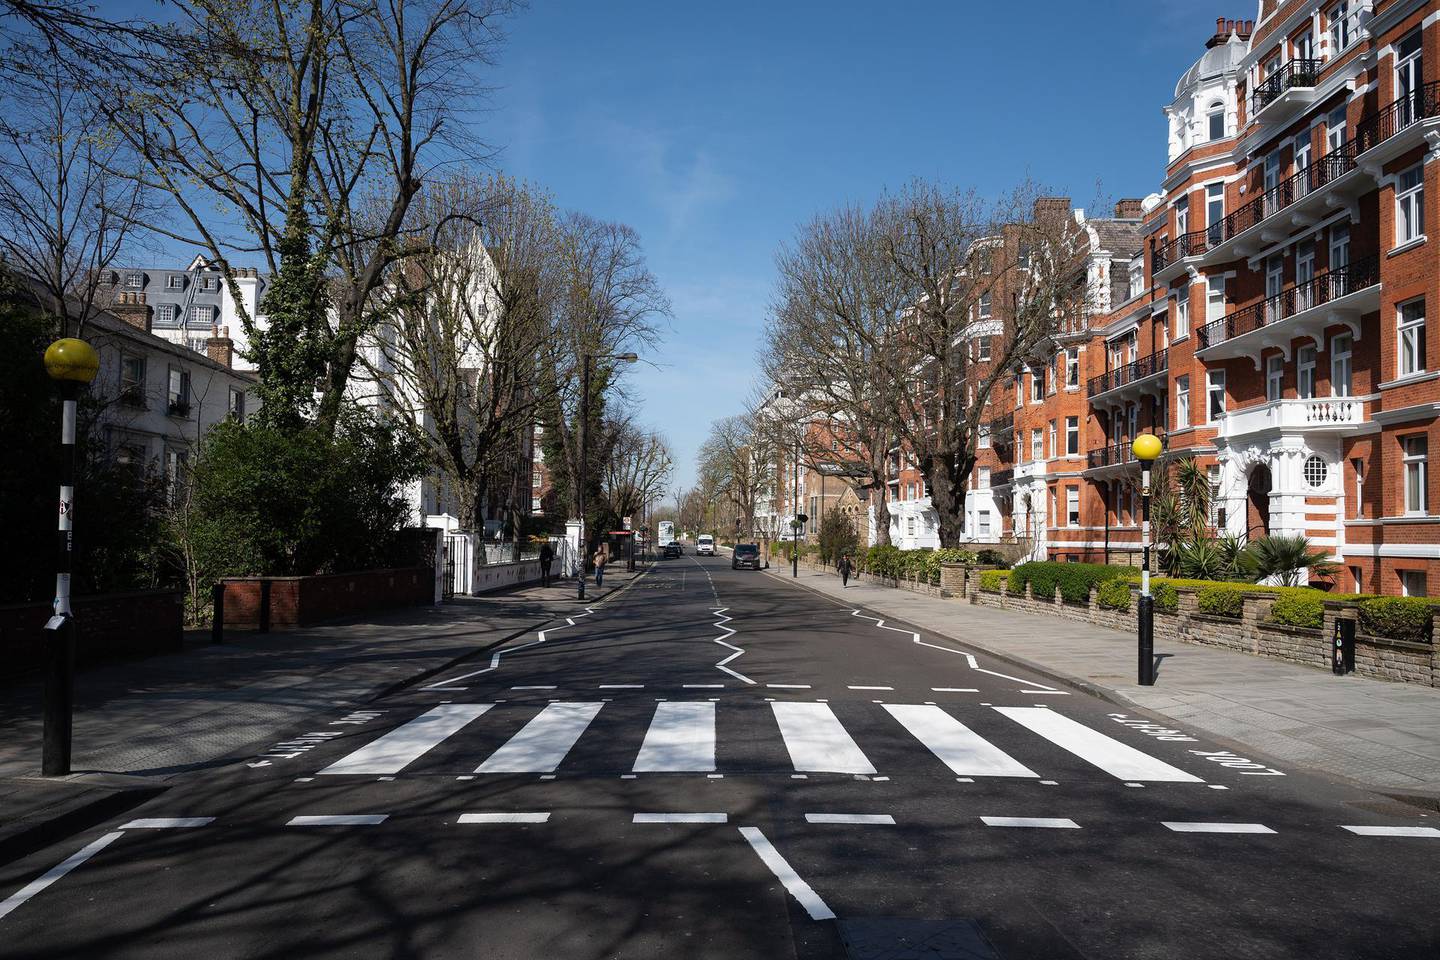 LONDON, ENGLAND - MARCH 24: The iconic Abbey Road crossing is seen after a re-paint by a Highways Maintenance team as they take advantage of the COVID-19 coronavirus lockdown and quiet streets to refresh the markings on March 24, 2020 in London, England. The Beatles made the pedestrian crossing famous after featuring a photograph of the group walking on it, near to Abbey Road Studios. The album and connected artwork celebrated its fiftieth anniversary last year. British Prime Minister, Boris Johnson, announced strict lockdown measures urging people to stay at home and only leave the house for basic food shopping, exercise once a day and essential travel to and from work. The Coronavirus (COVID-19) pandemic has spread to at least 182 countries, claiming over 10,000 lives and infecting hundreds of thousands more. (Photo by Leon Neal/Getty Images)